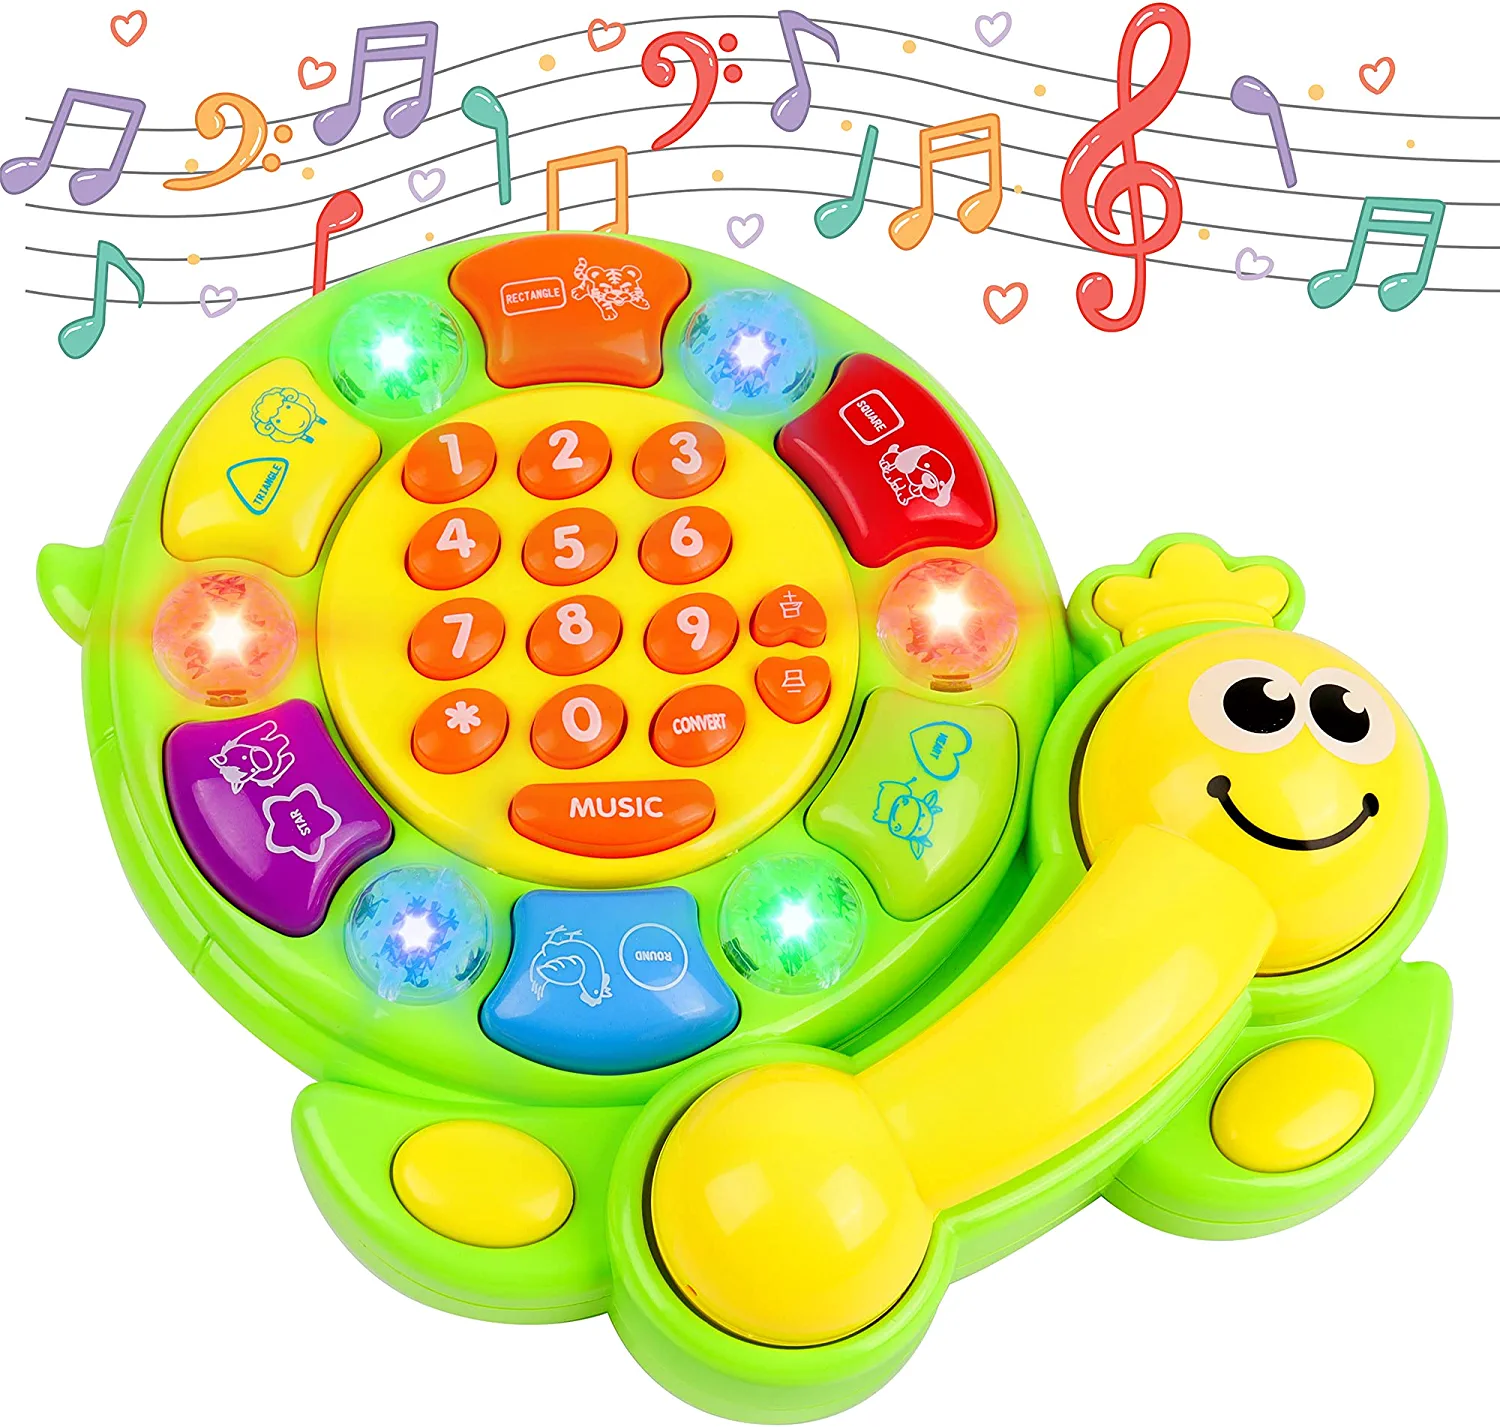 Honoson Whisper Reading Phones Auditory Feedback Reading Phone Classroom  Hear Myself Sound Phone Colored Speech Therapy Toy Tool for Children